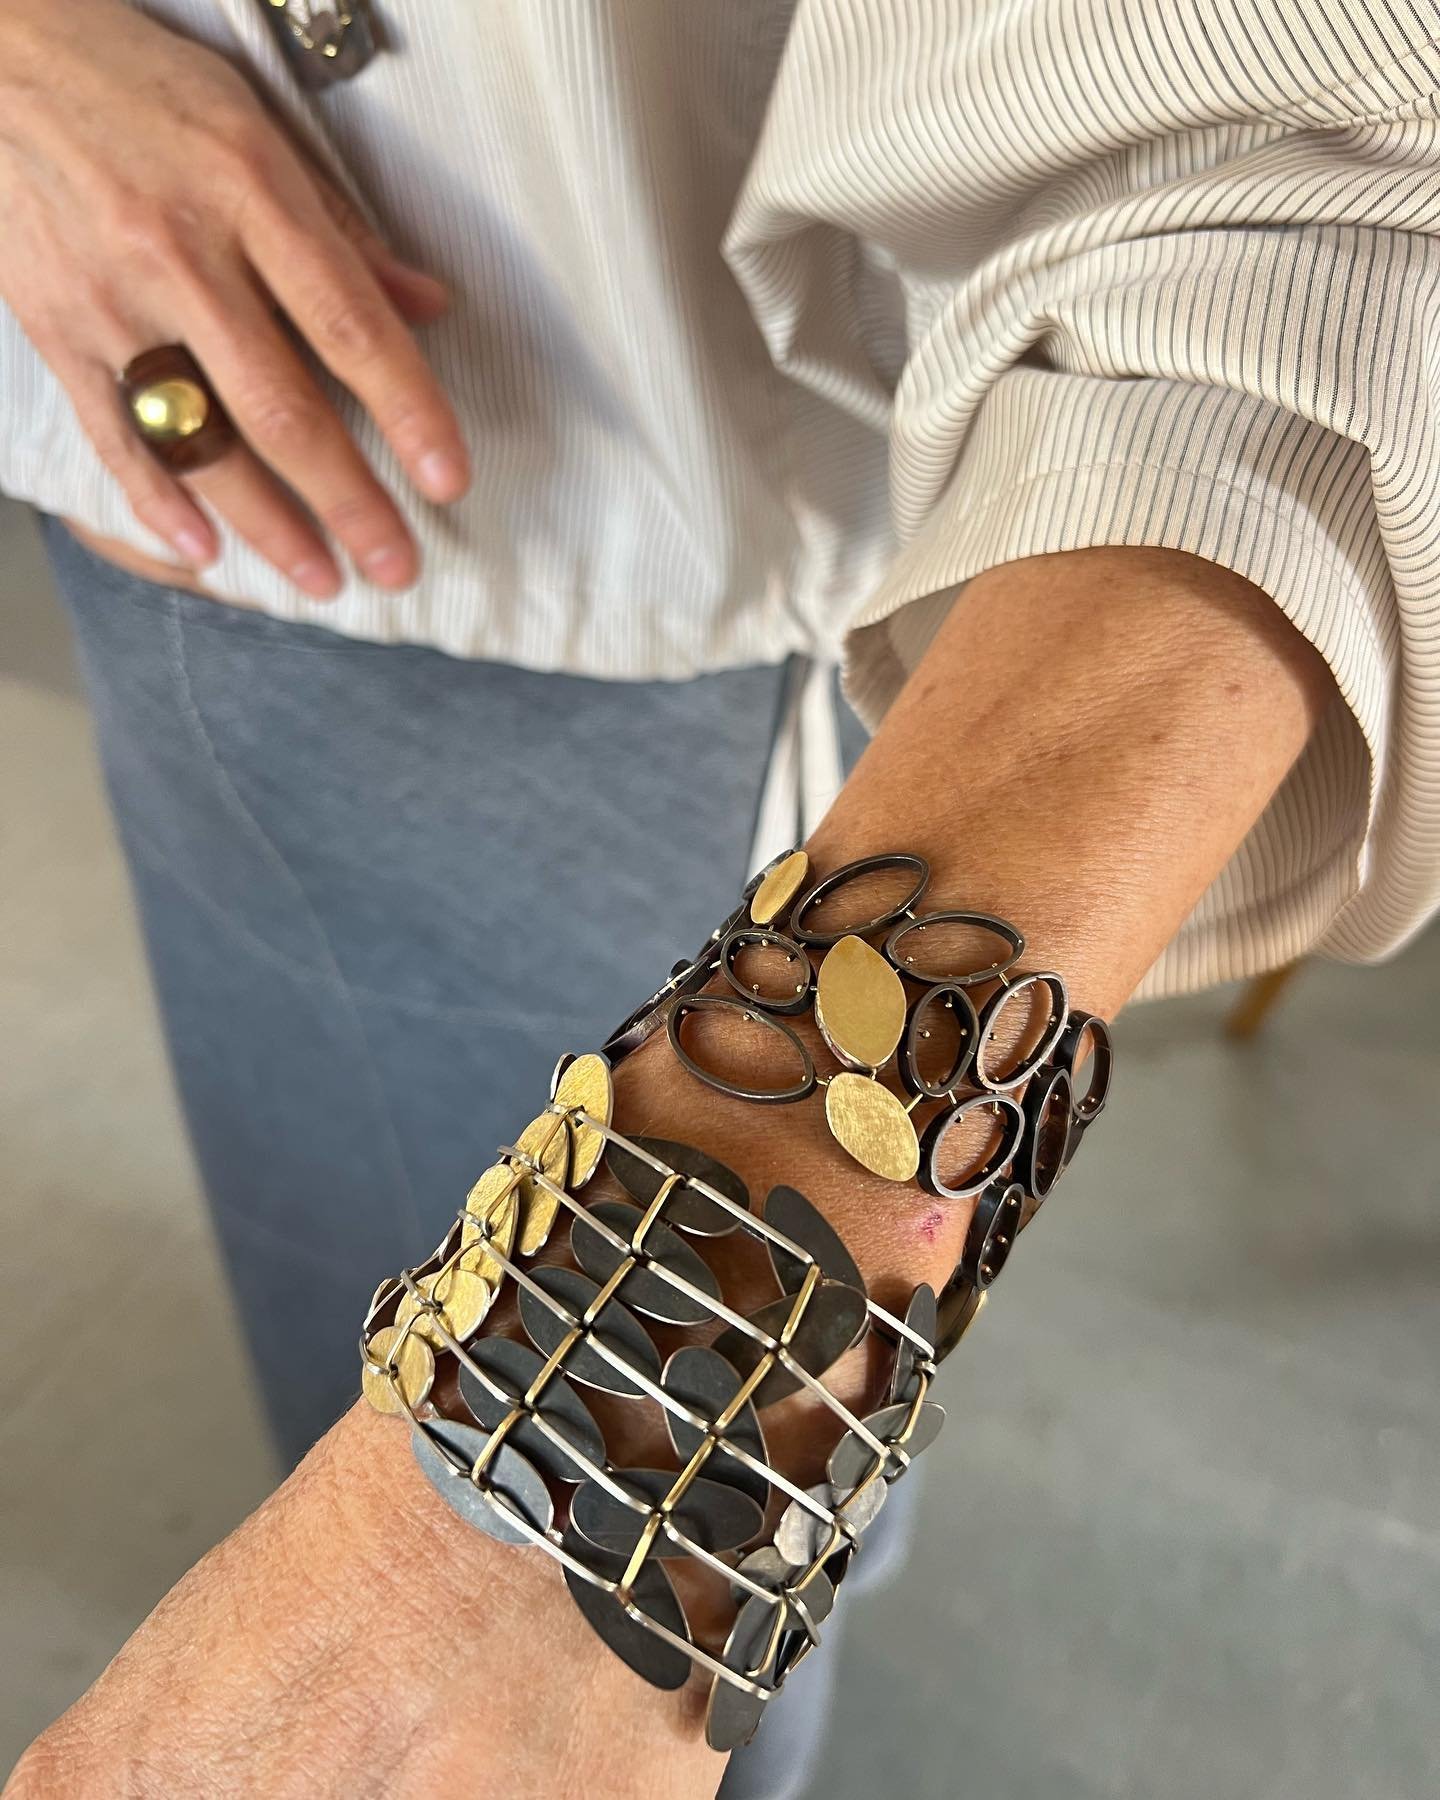 Love seeing these two bracelets back together!
Thank you to all that came out on a rainy day to our open studios!
#laura_lienhard_studios#shibumigallery  #oneofakindjewelry#fattoamano  #shibuichi